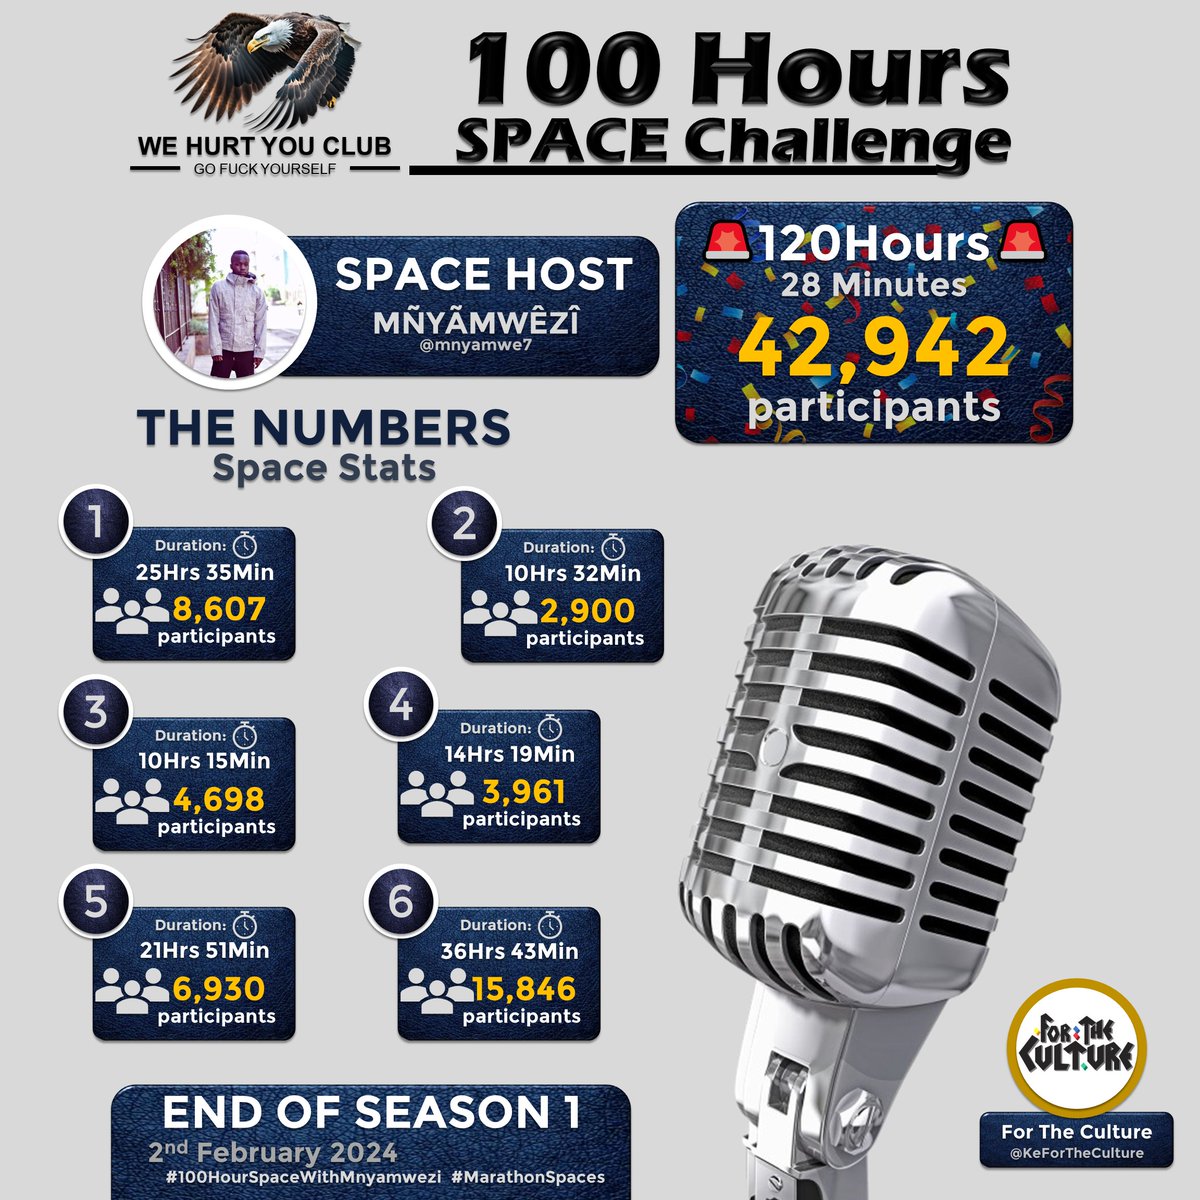 🚨100Hour Space Challenge🚀

📊STATS and NUMBERS🔥